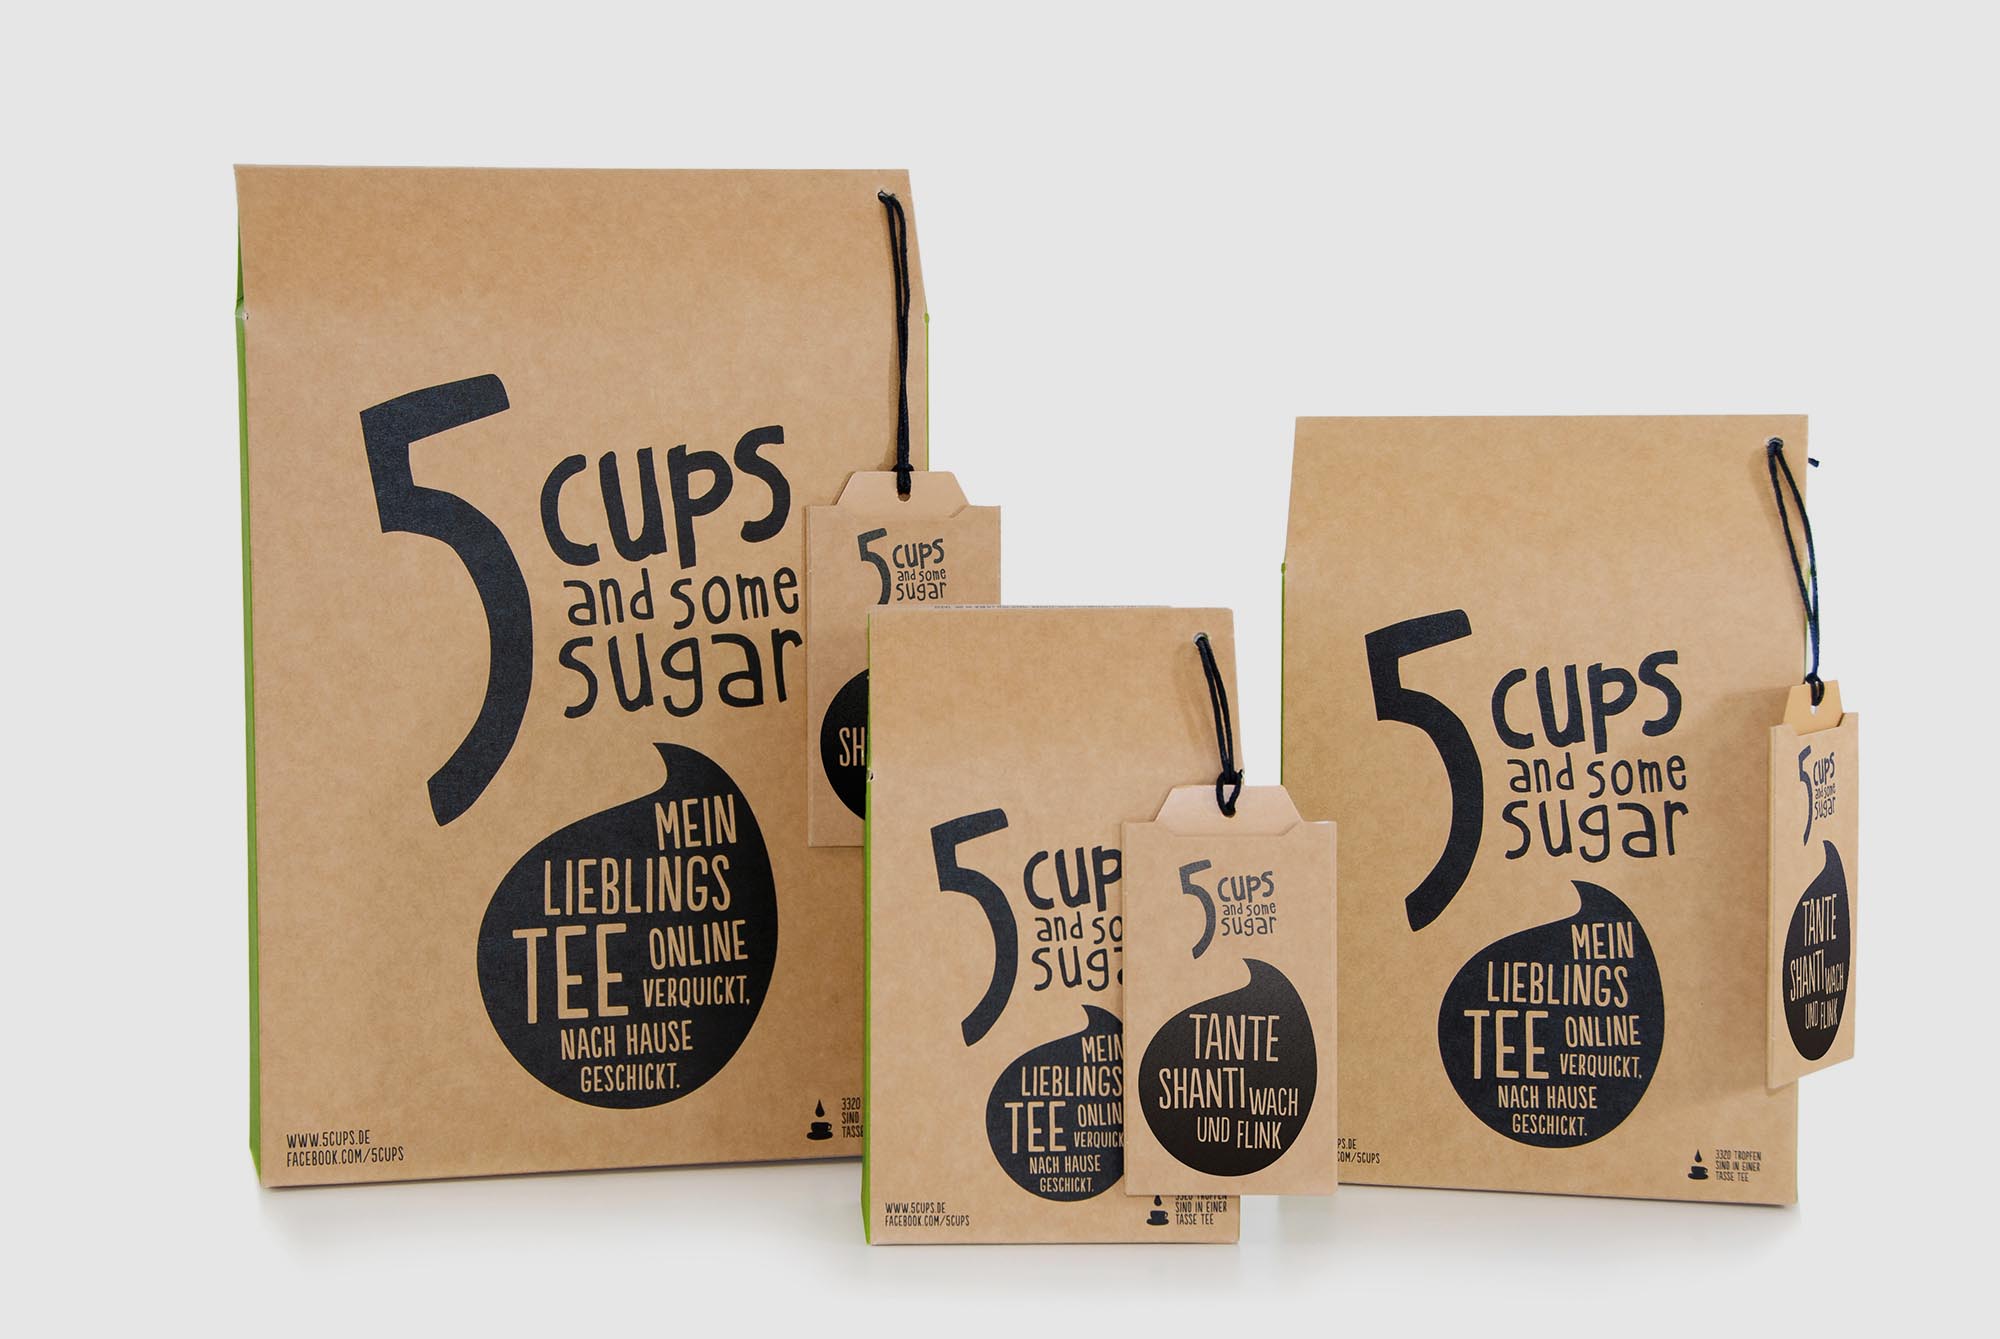 5 cups and some sugar packaging